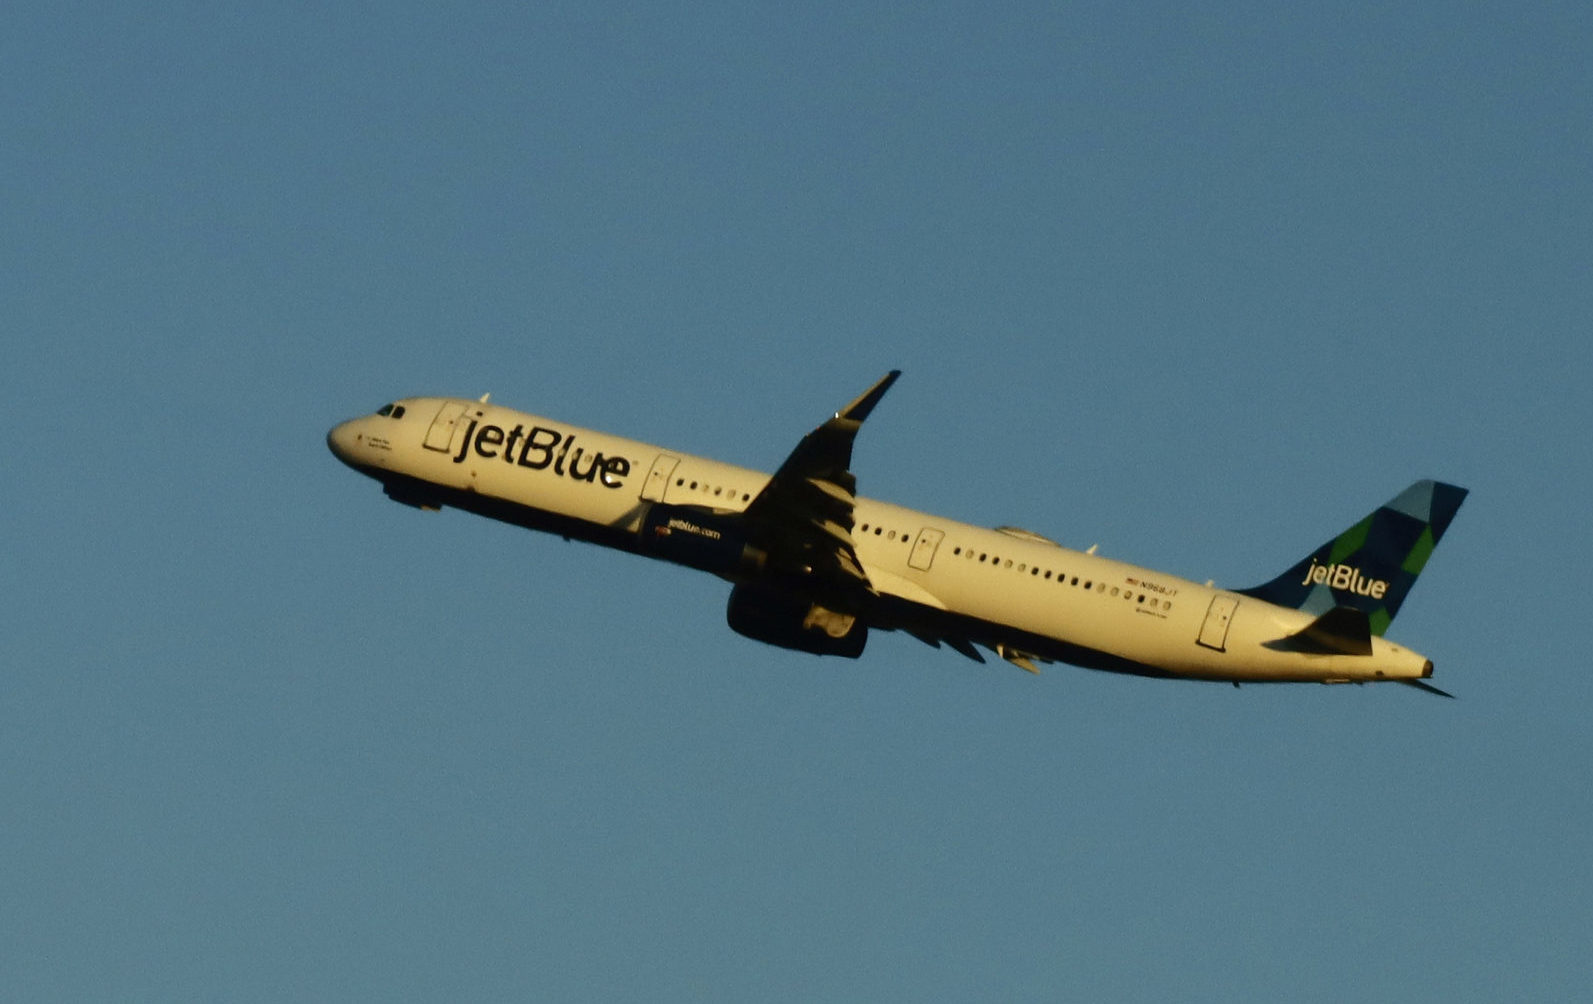 JetBlue Airplane at Newark Liberty Airport in New Jersey